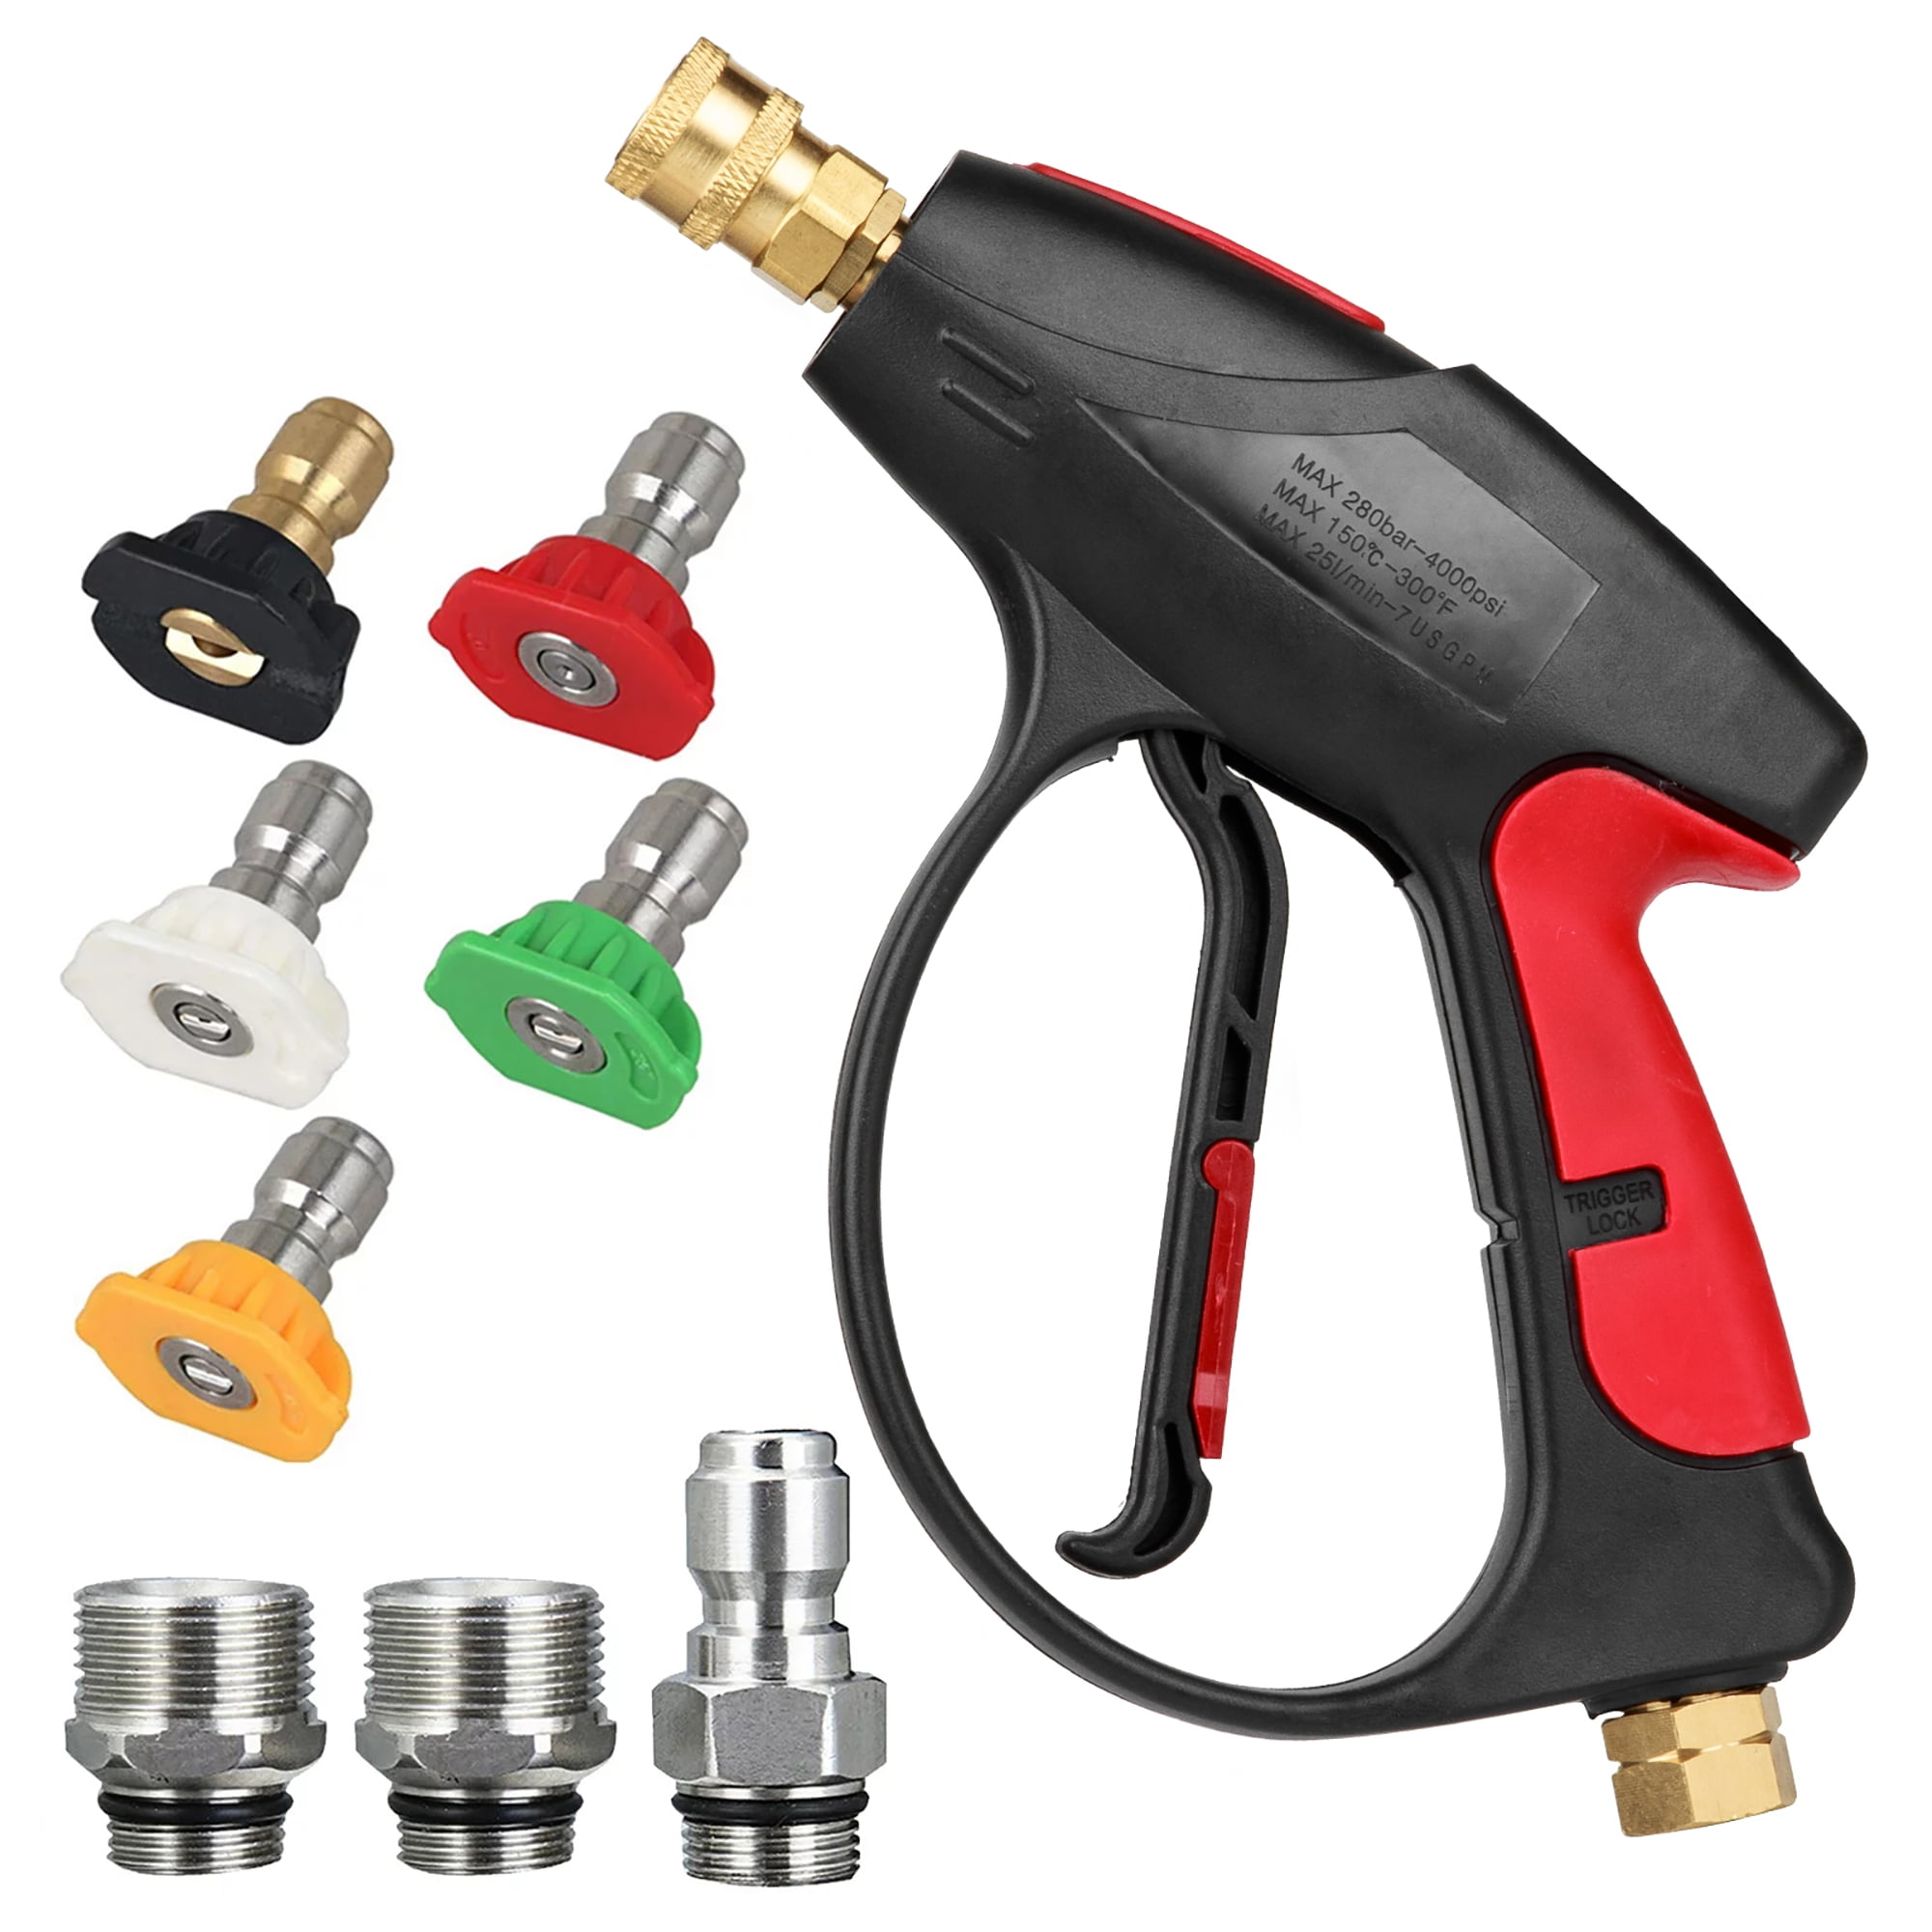 Pressure Washer Gun 4000PSI Car Power Washer Gun with 1/4 Quick  Connector+5 Nozzles for Car Pressure Power Washers 